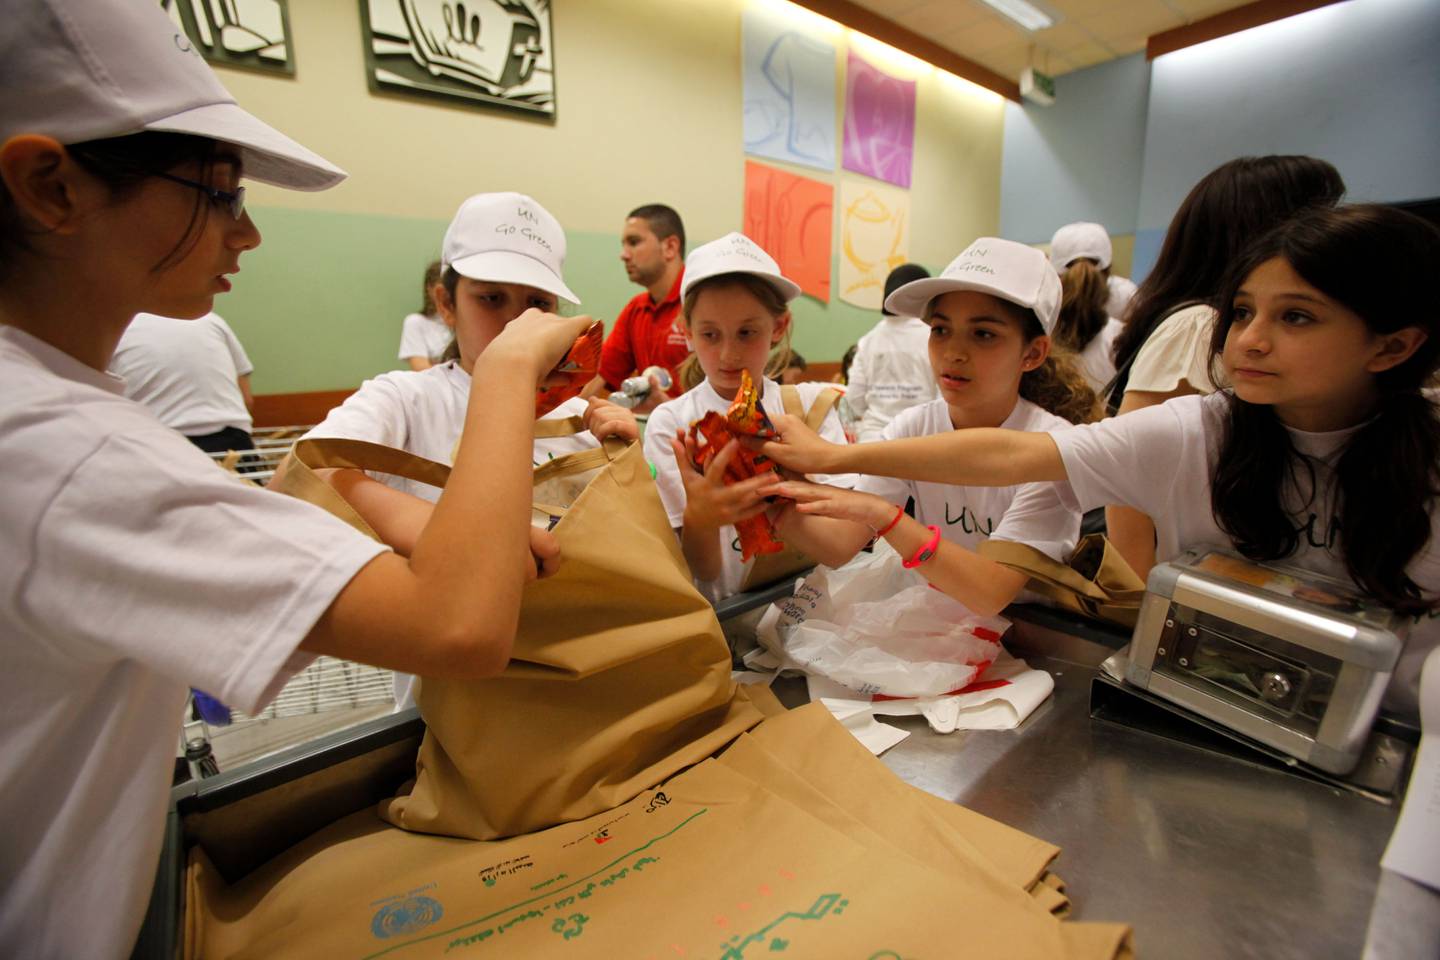 School children help in distributing Fabric bags in a super market during the UN launching of an awarness campaign to replace the flimsy disposable grocery-store-style plastic bags with fabric ones, in Amman, Jordan on June 03, 2010. (Salah Malkawi for The National) 